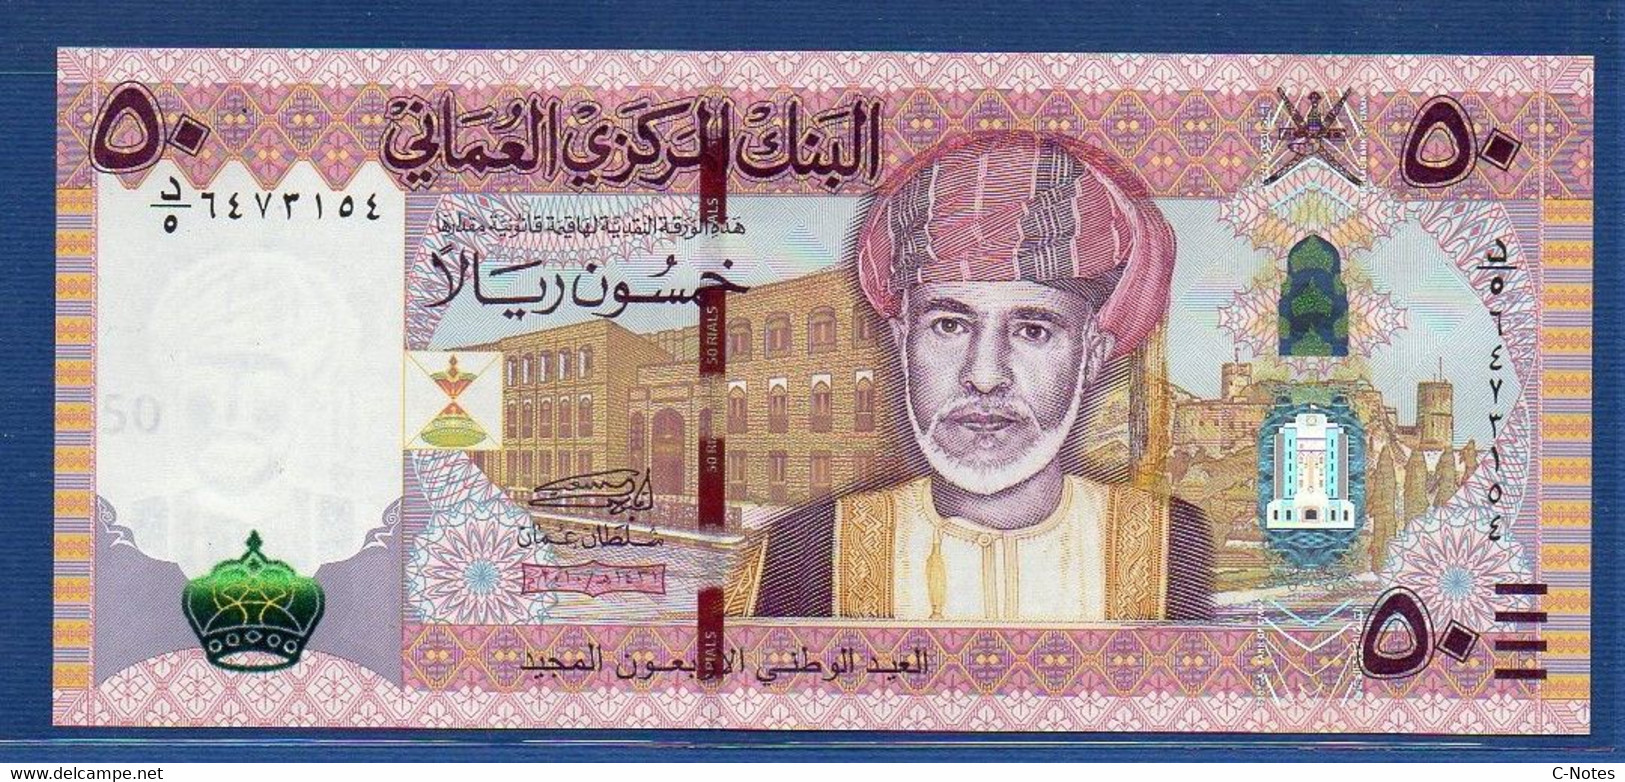 OMAN  - P.47a1 – 50 Rials 2010 UNC See Photos, "40th National Day" Commemorative Issue - Oman